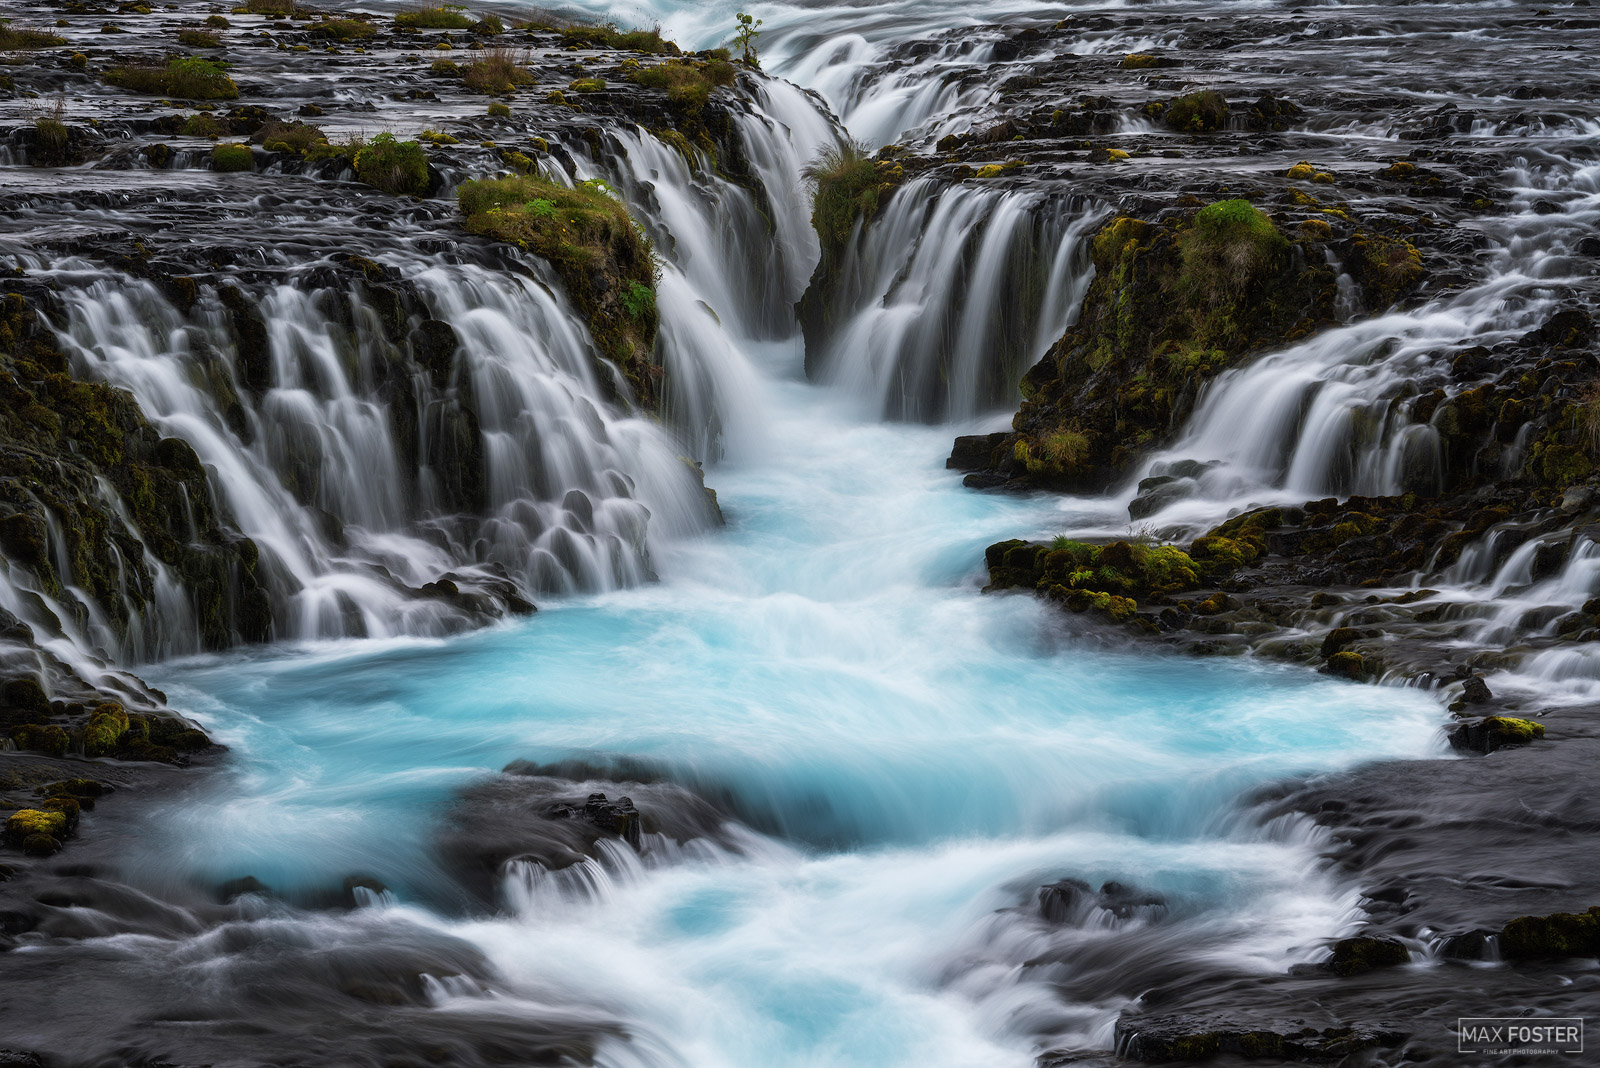 Bring nature into your home with Dreamstreams, Max Foster's limited edition photography print of Bruarfoss Waterfall in Iceland...